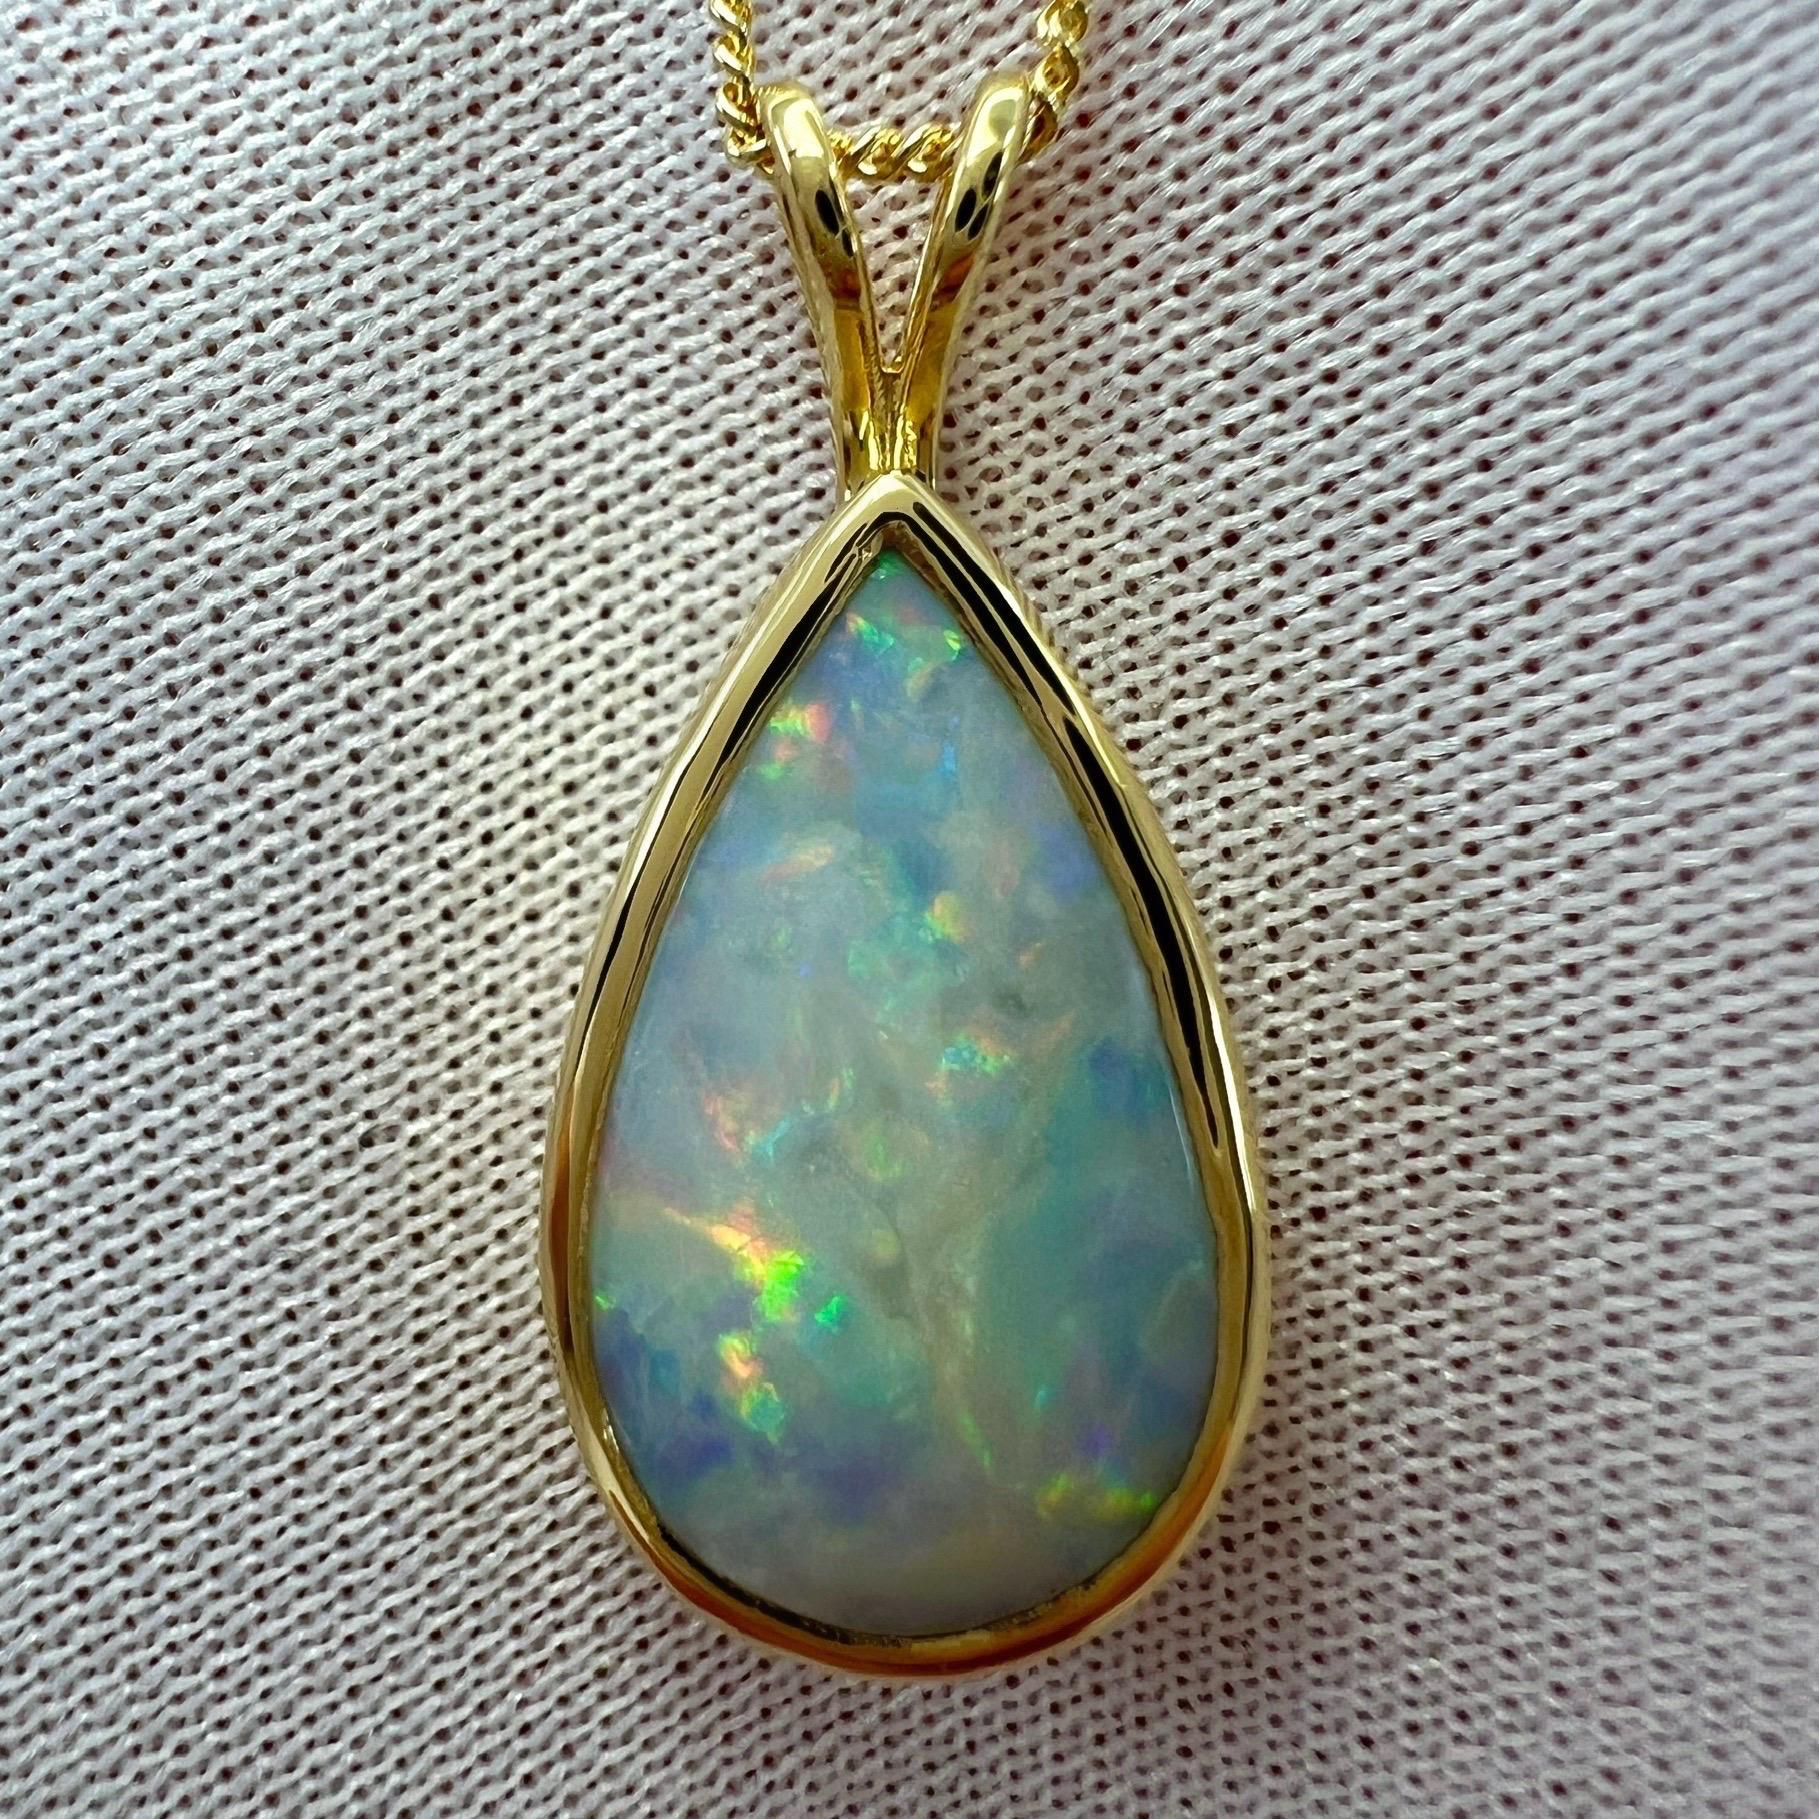 Natural Australian Cooper Pedy White Opal 18k Yellow Gold Solitaire Pendant Necklace.

3.55 Carat opal with beautiful play of colour and an excellent pear cabochon cut. Set in a fine 18k yellow gold rubover bezel pendant. Stunning opal with an